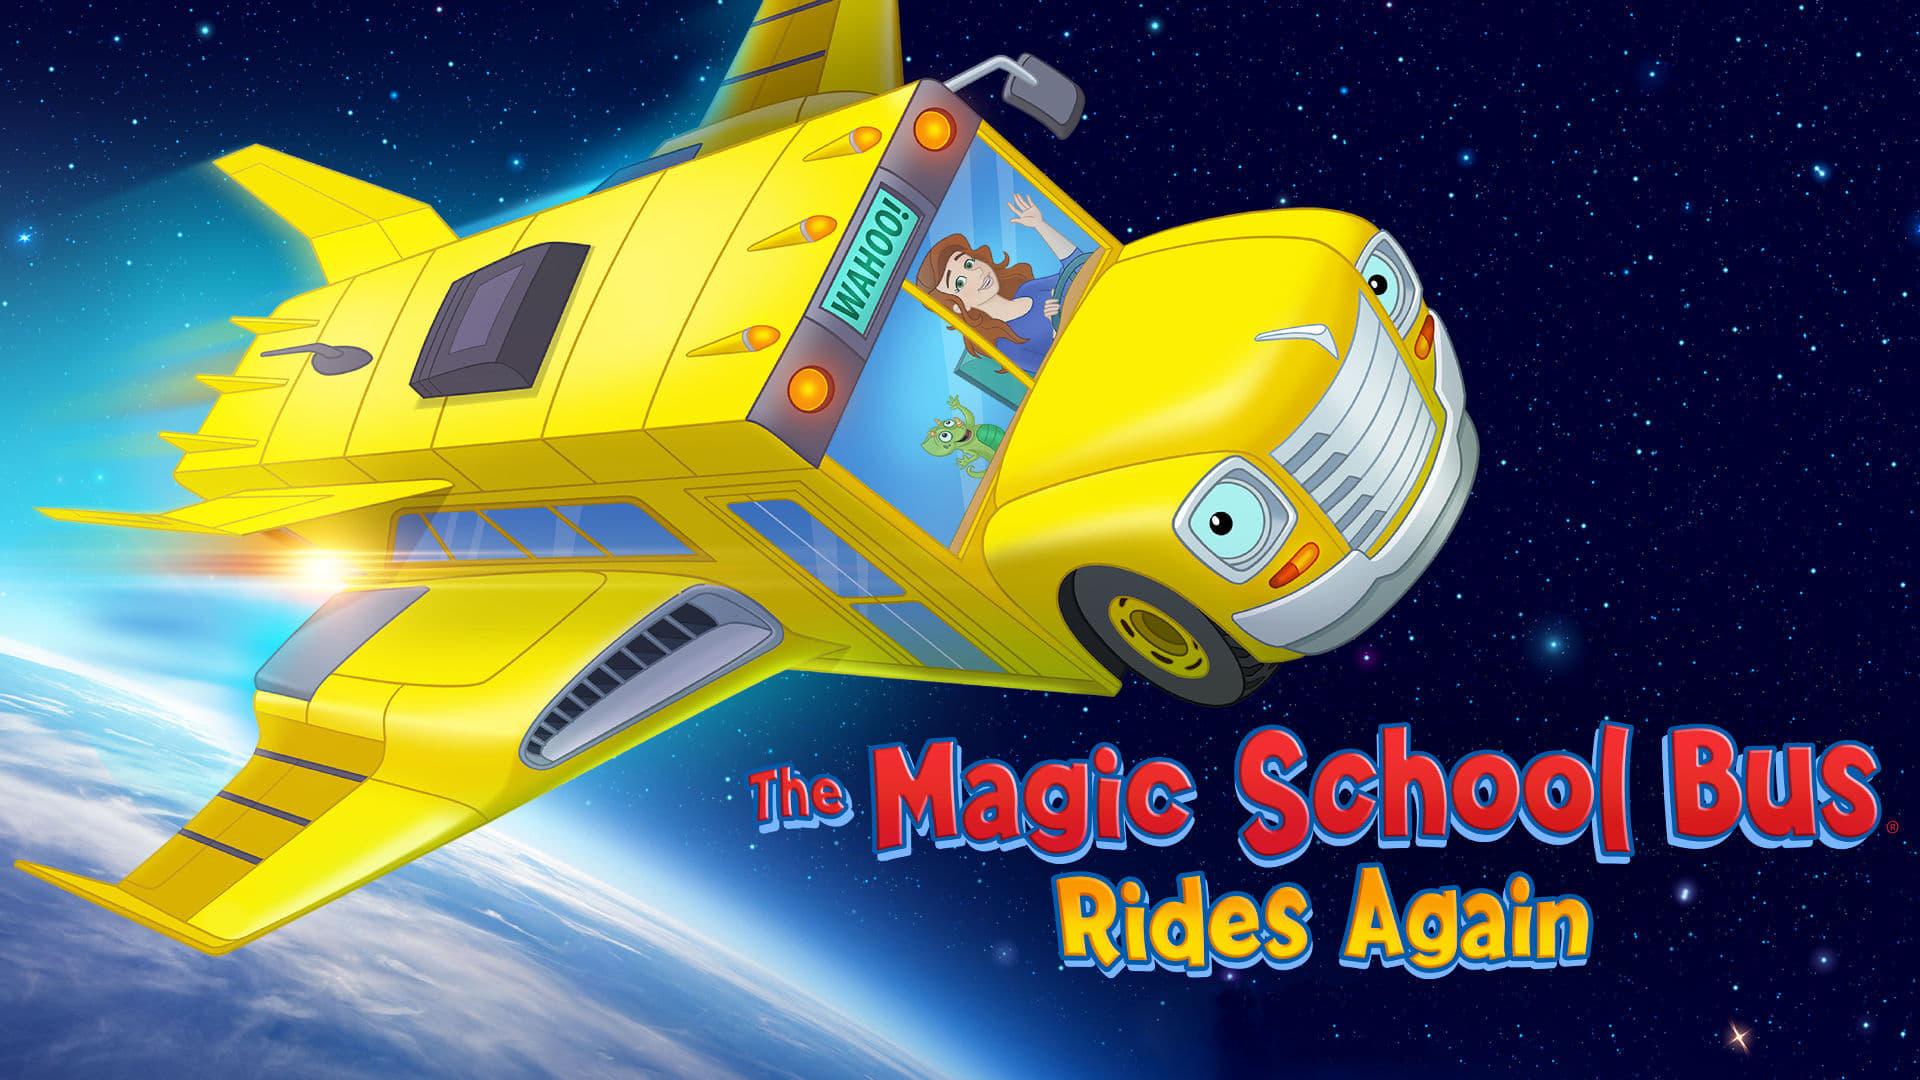 The Magic School Bus Rides Again: Kids in Space backdrop